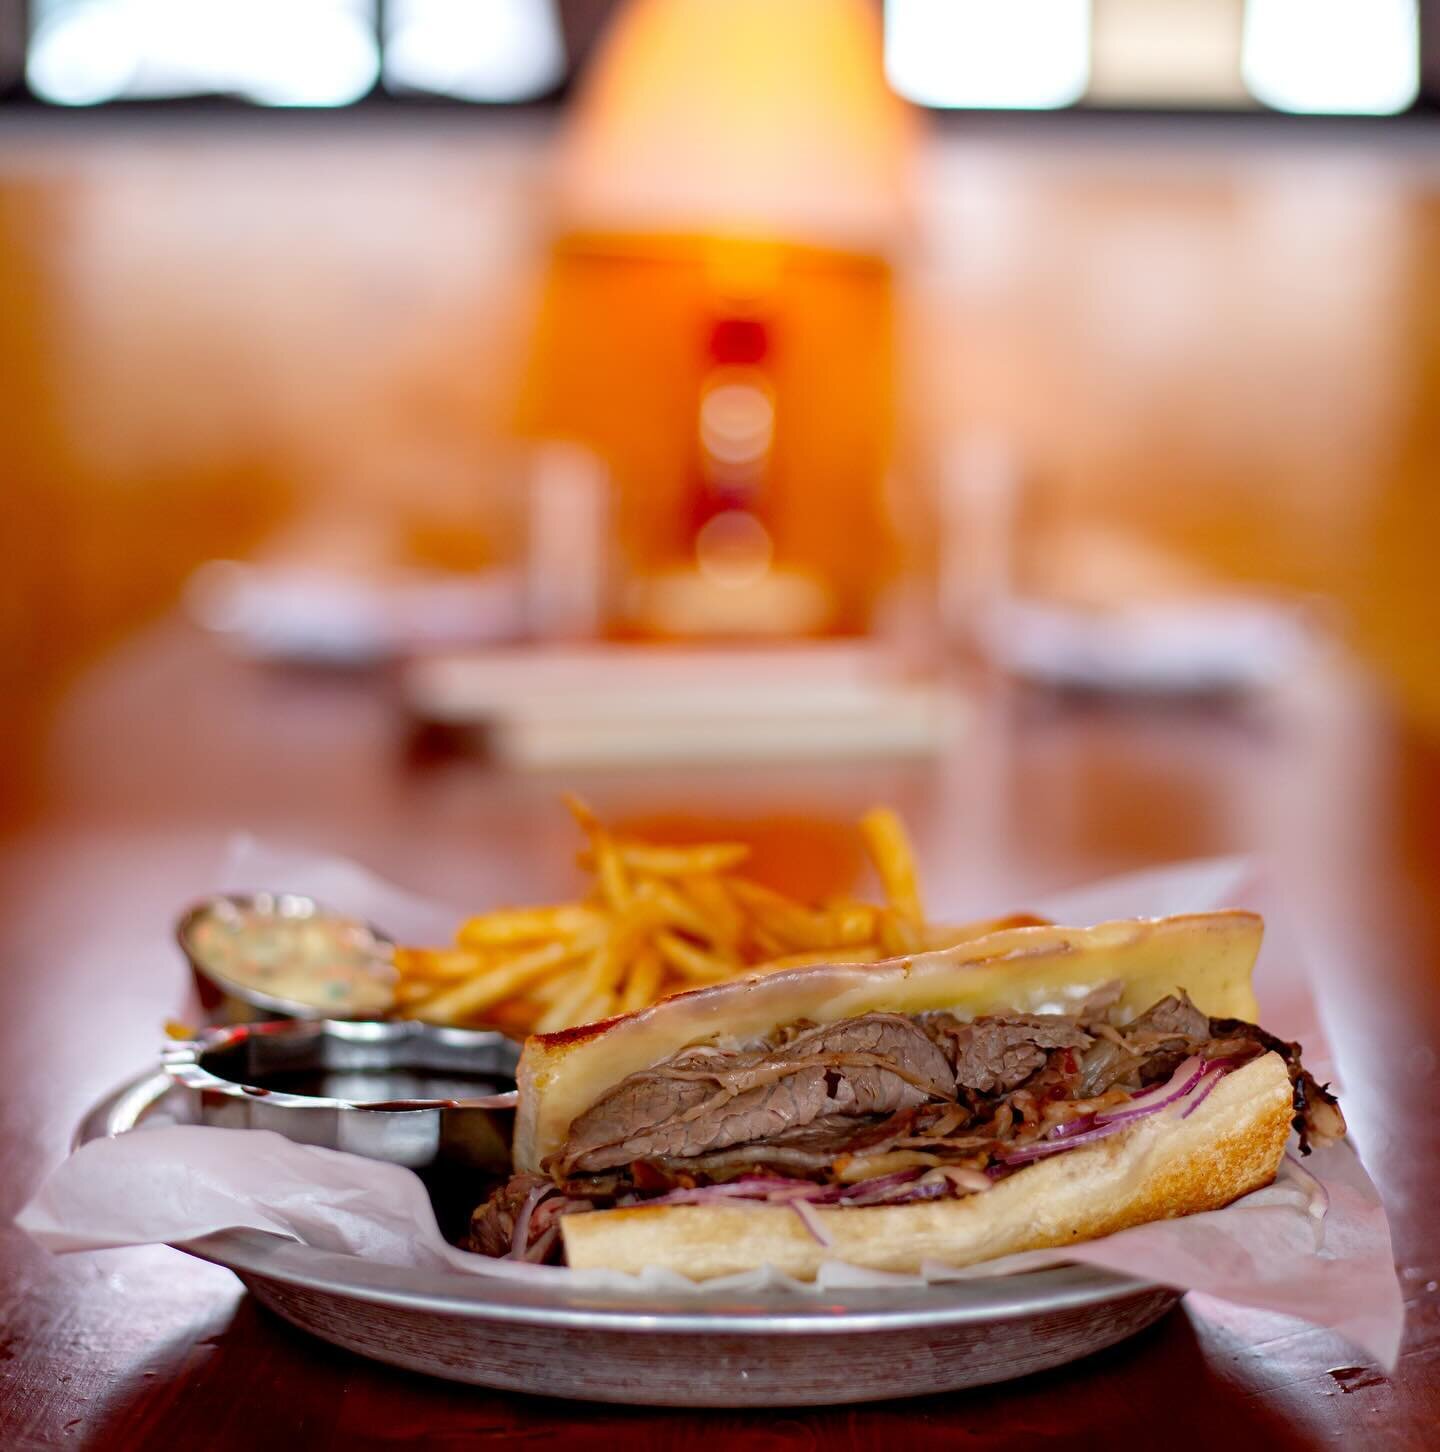 SATURDAYS are for PRIME RIB! 
We serve up a fat prime rib dinner every Saturday but have you had our Prime Rib Dip? It&rsquo;s a hearty stick to your ribs sandwich! Doors open at 4pm. See you soon! 
#primerib #frenchdip #supperclub